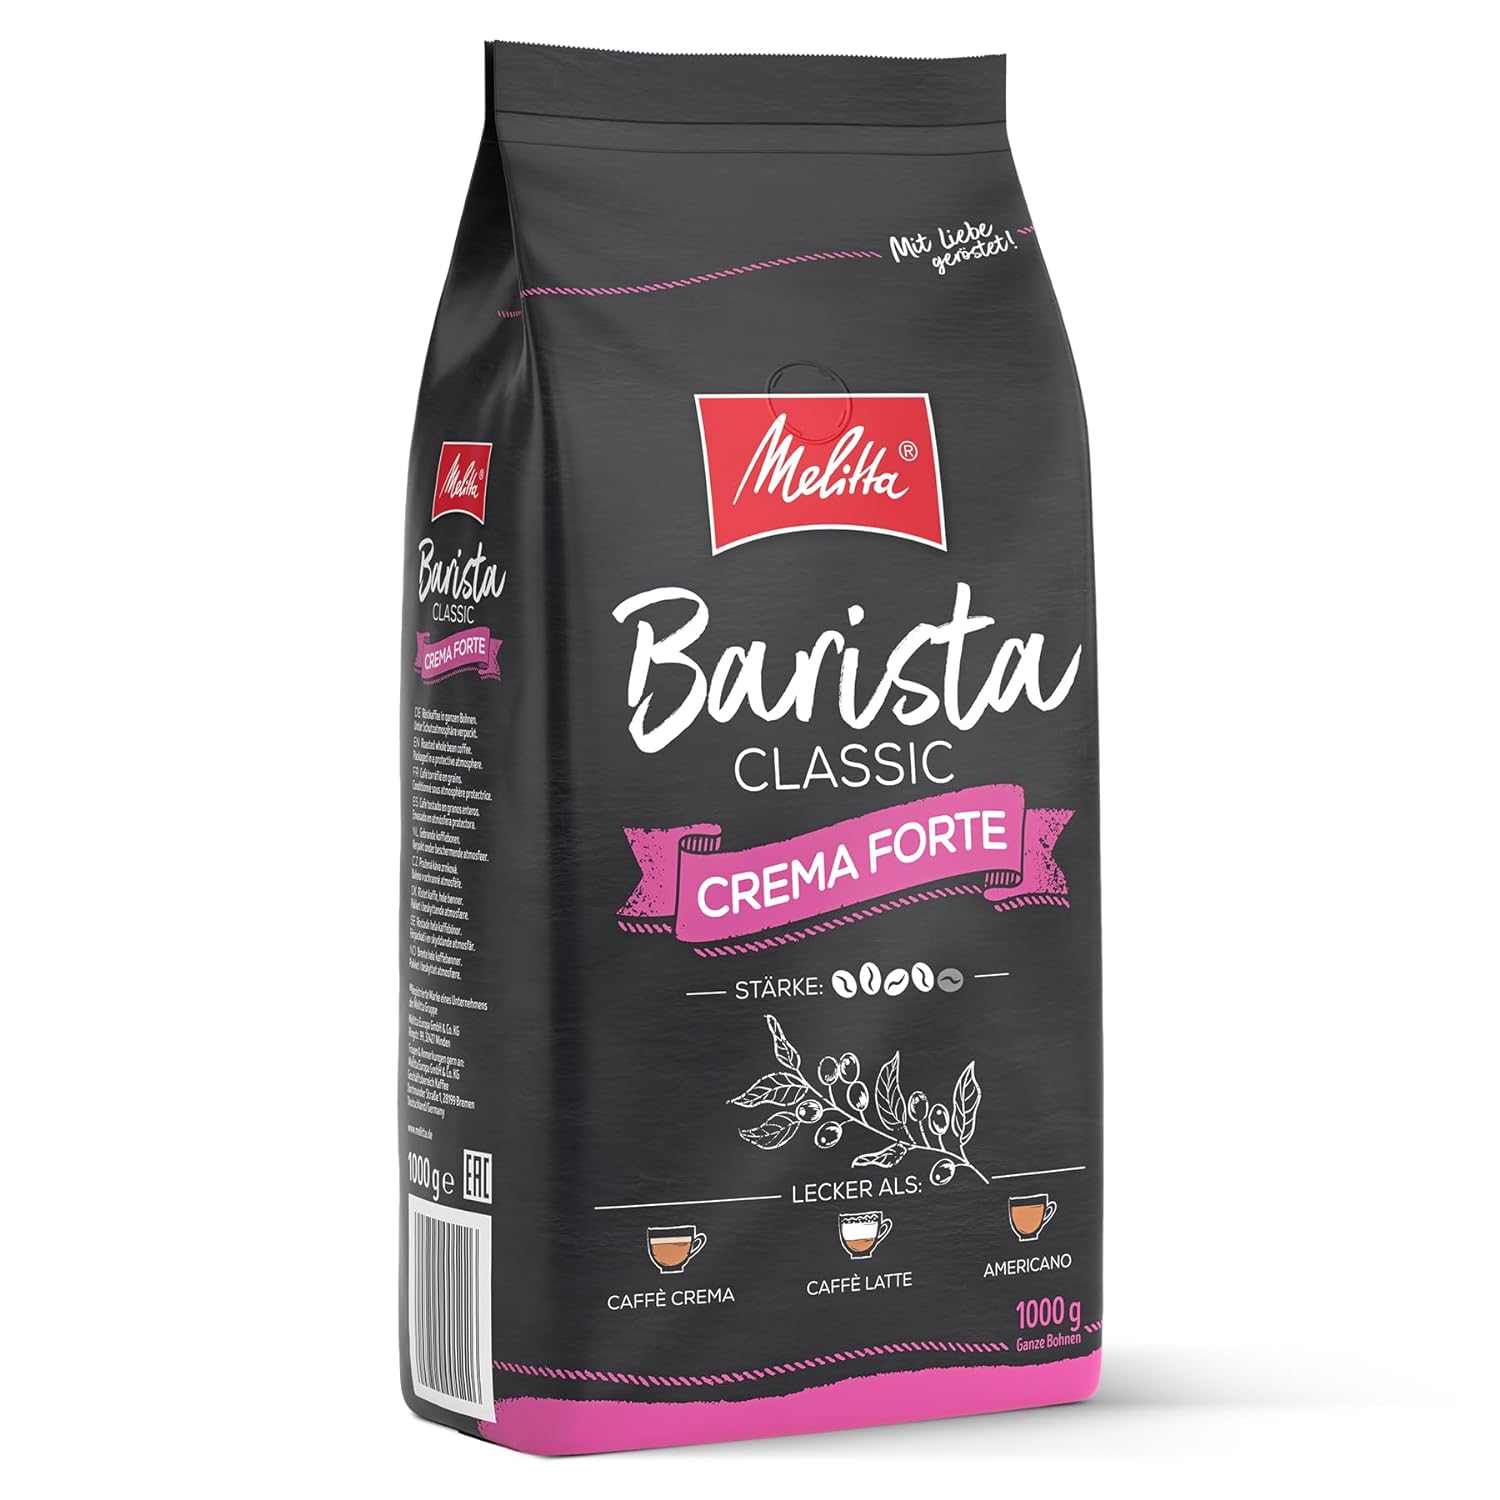 Melitta Barista Classic Crema Forte, Whole Coffee Beans 1 kg, Unground, Coffee Beans for Fully Automatic Coffee Machine, Strong Roast, Strength 4